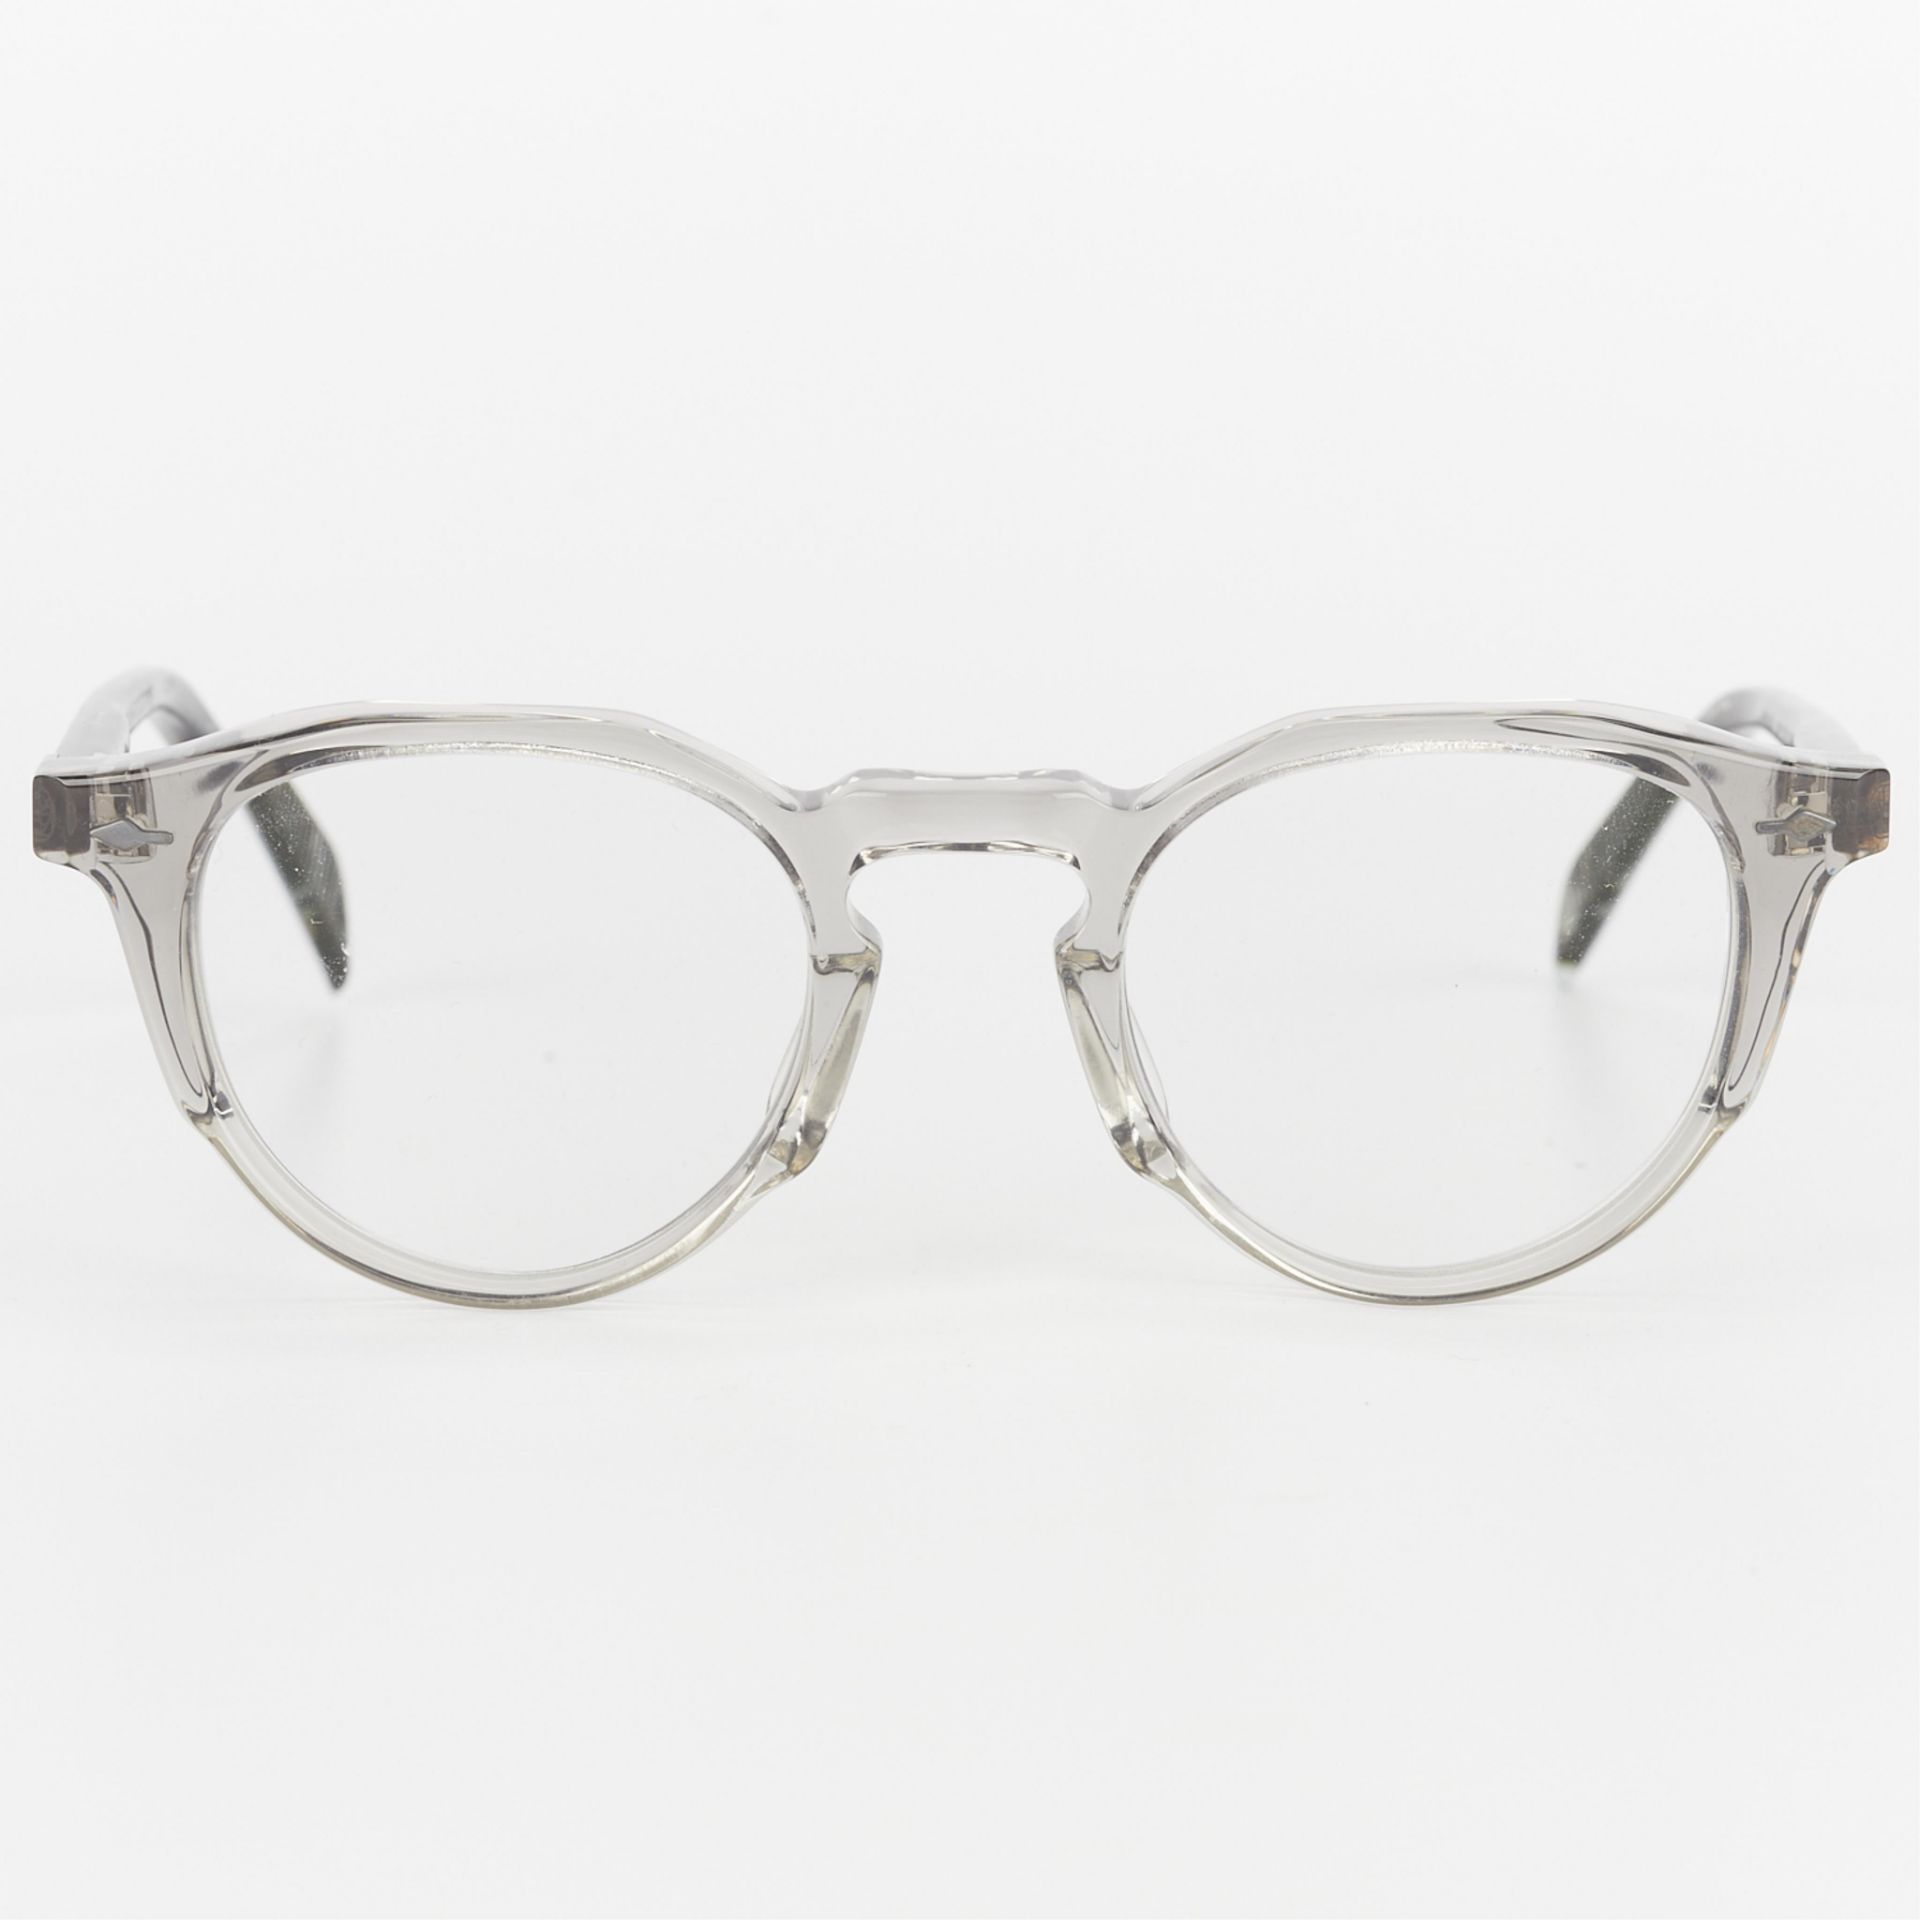 Grp 2 Jacques Marie Mage Eyeglasses - Image 2 of 18